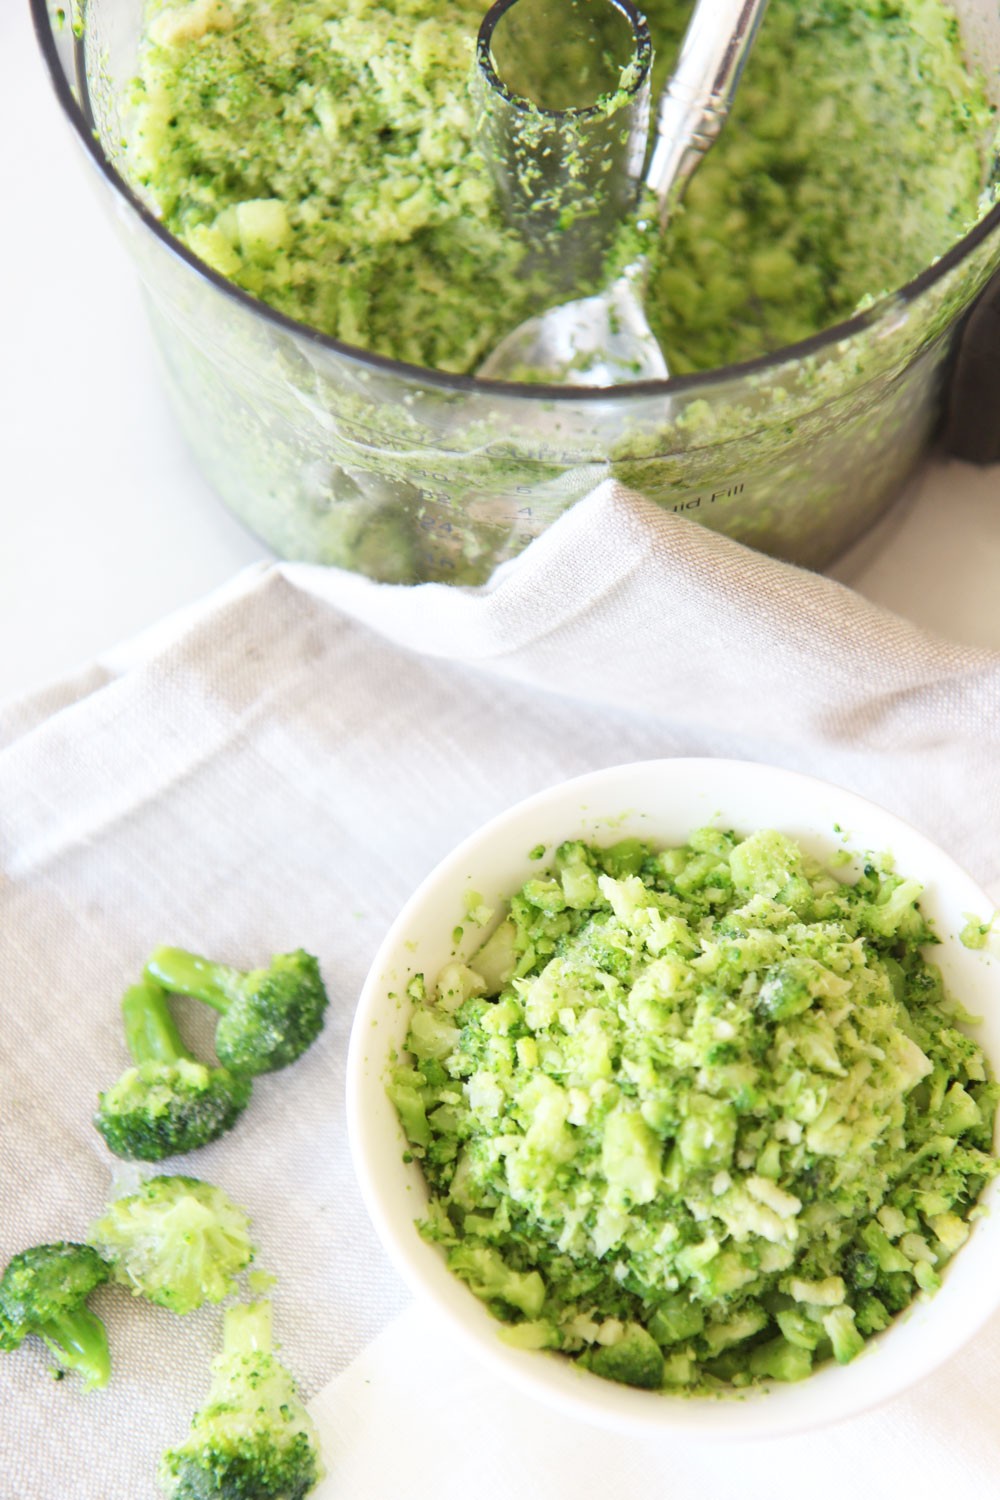 How to Make Broccoli Rice. Broccoli is sweet and hearty and makes awesome fried rice or rice side dish. Happy Cooking! www.ChopHappy.com #howtomakebroccolirice #broccolirice